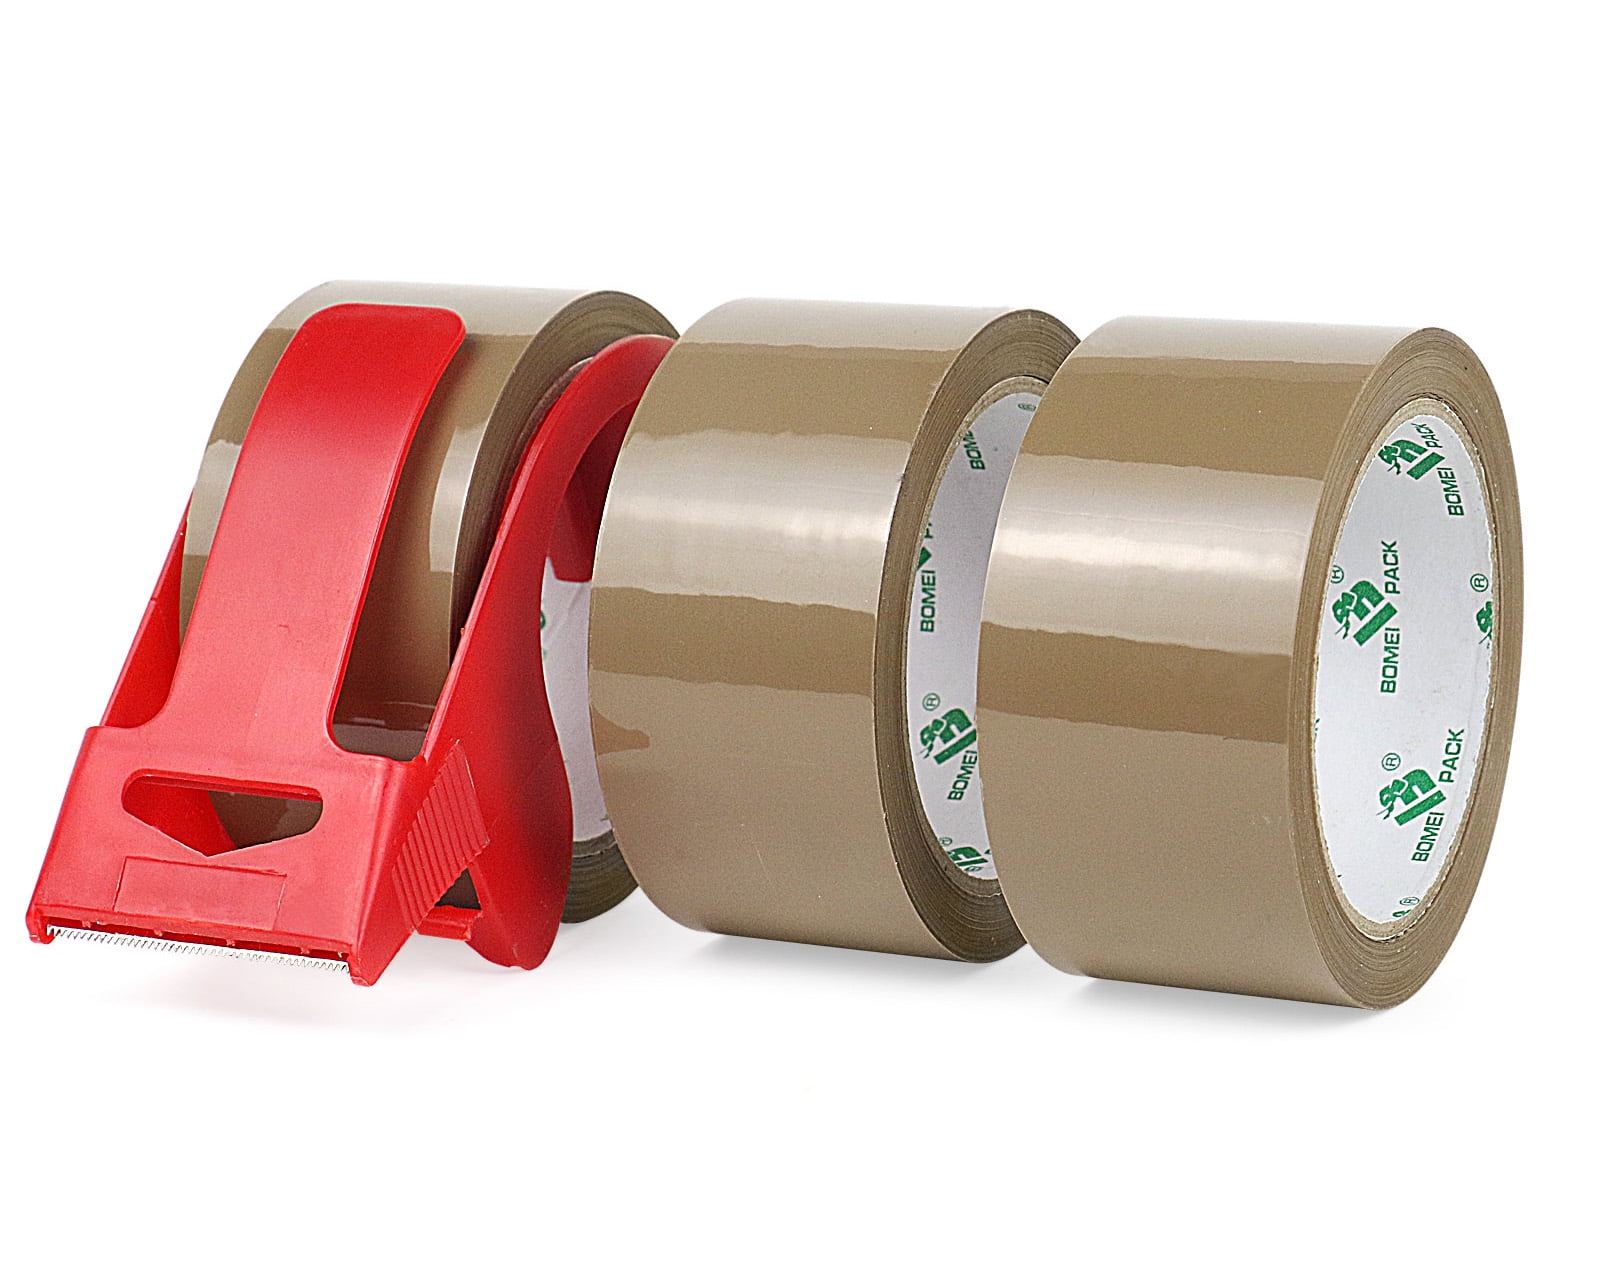 Mr. Pen- Packing Tape, 2 Pack, 2 inch Wide, 60 Yards, 1.9mil, No Smell, Shipping  Tape, Packaging Tape, Packing Tape Rolls, Clear Packing Tape 